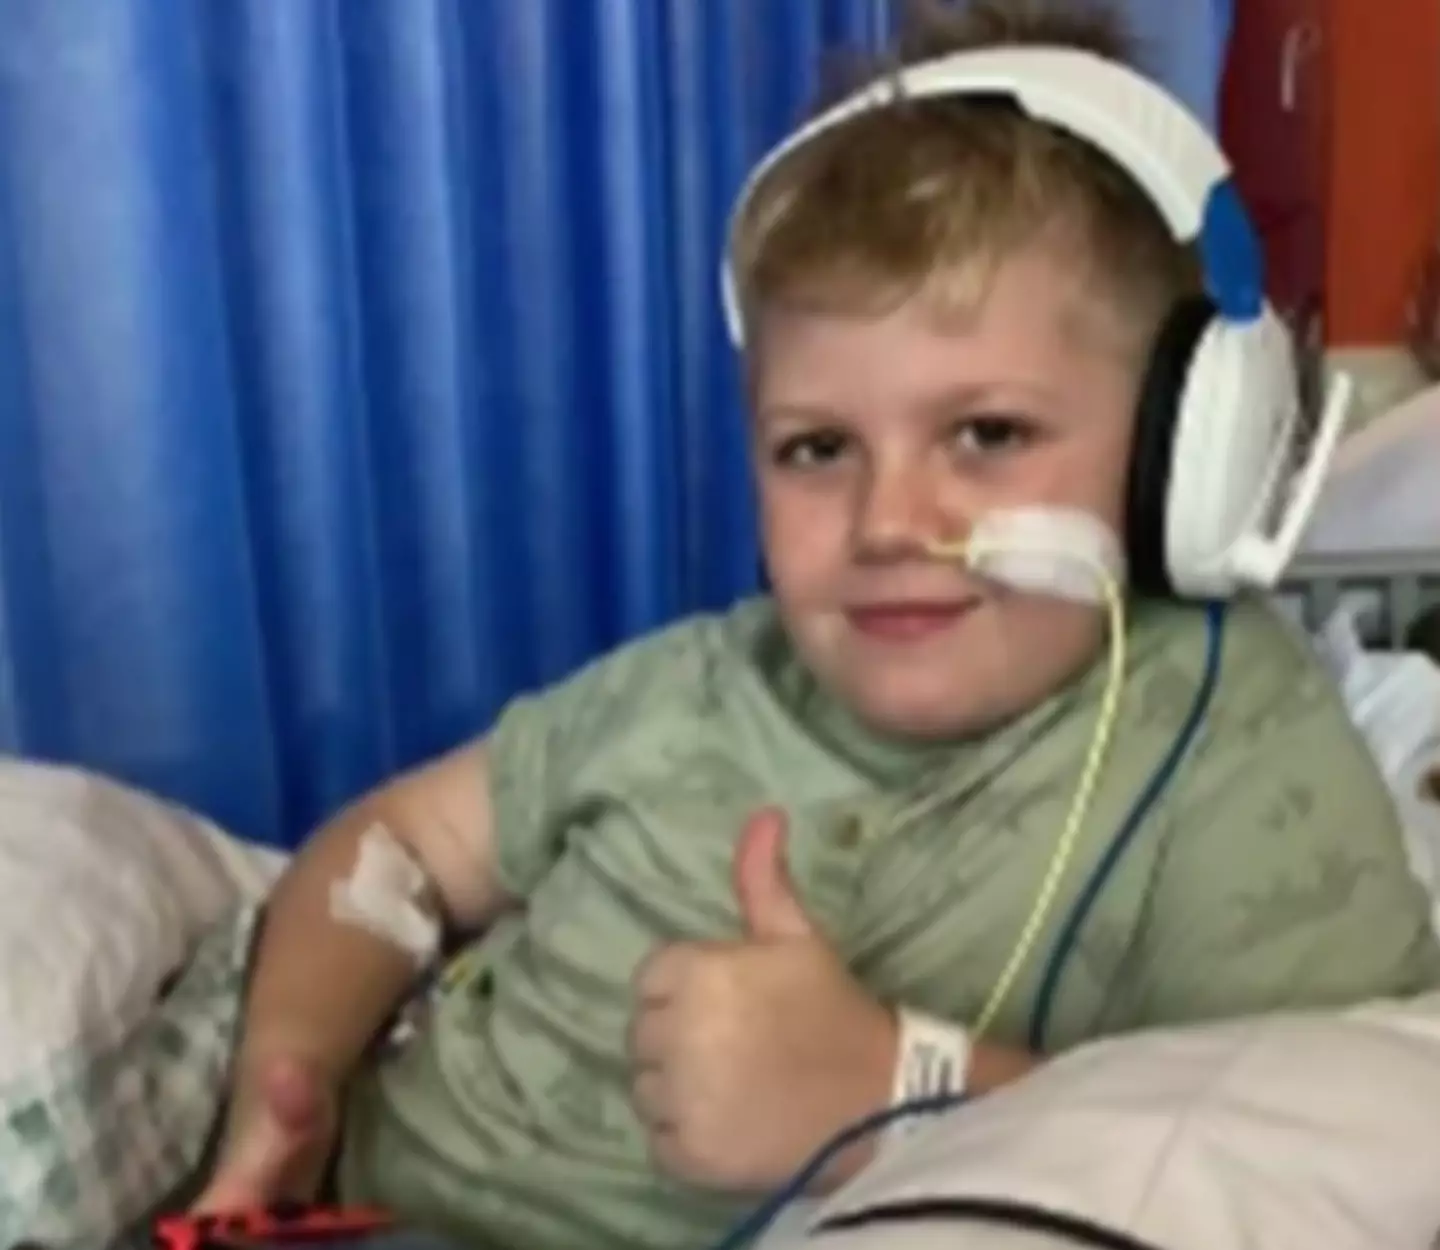 Marley had to undergo surgery after doctors discovered an issue with his oesophagus.